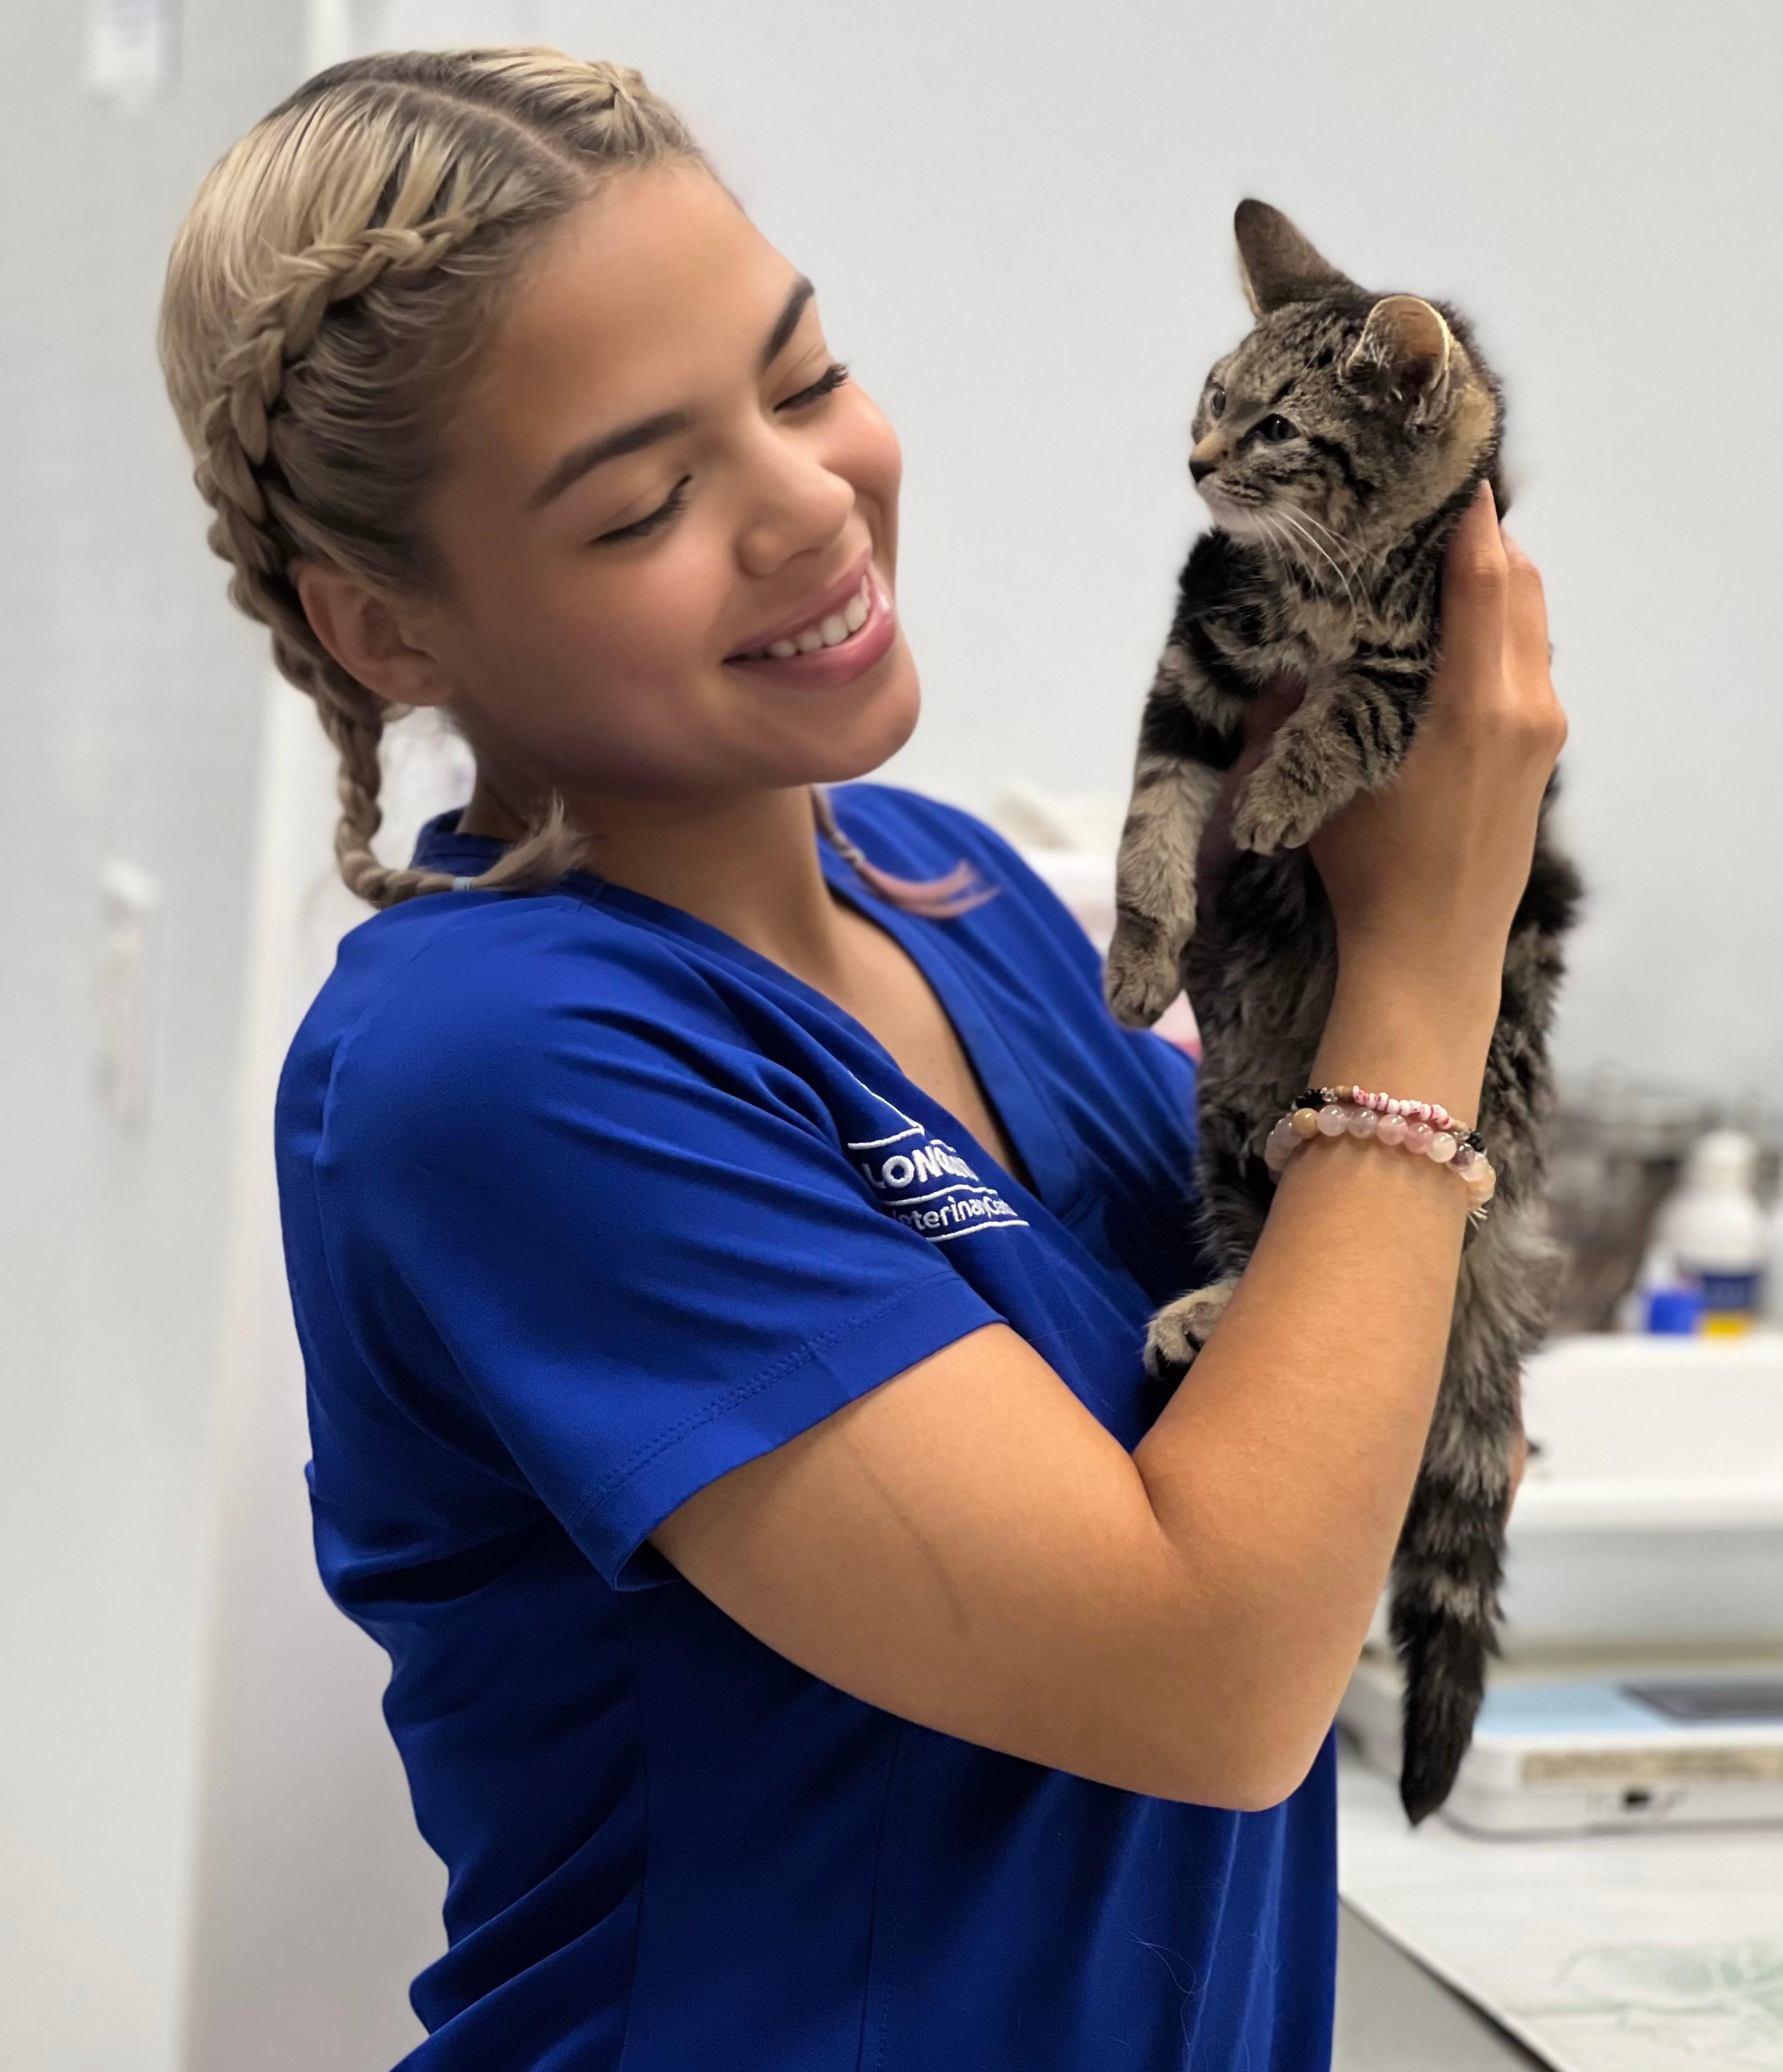 Our comprehensive facility offers NJ's premier integrative veterinary center, an emergency hospital, our own Longevity Raw pet food, grooming services, and more!